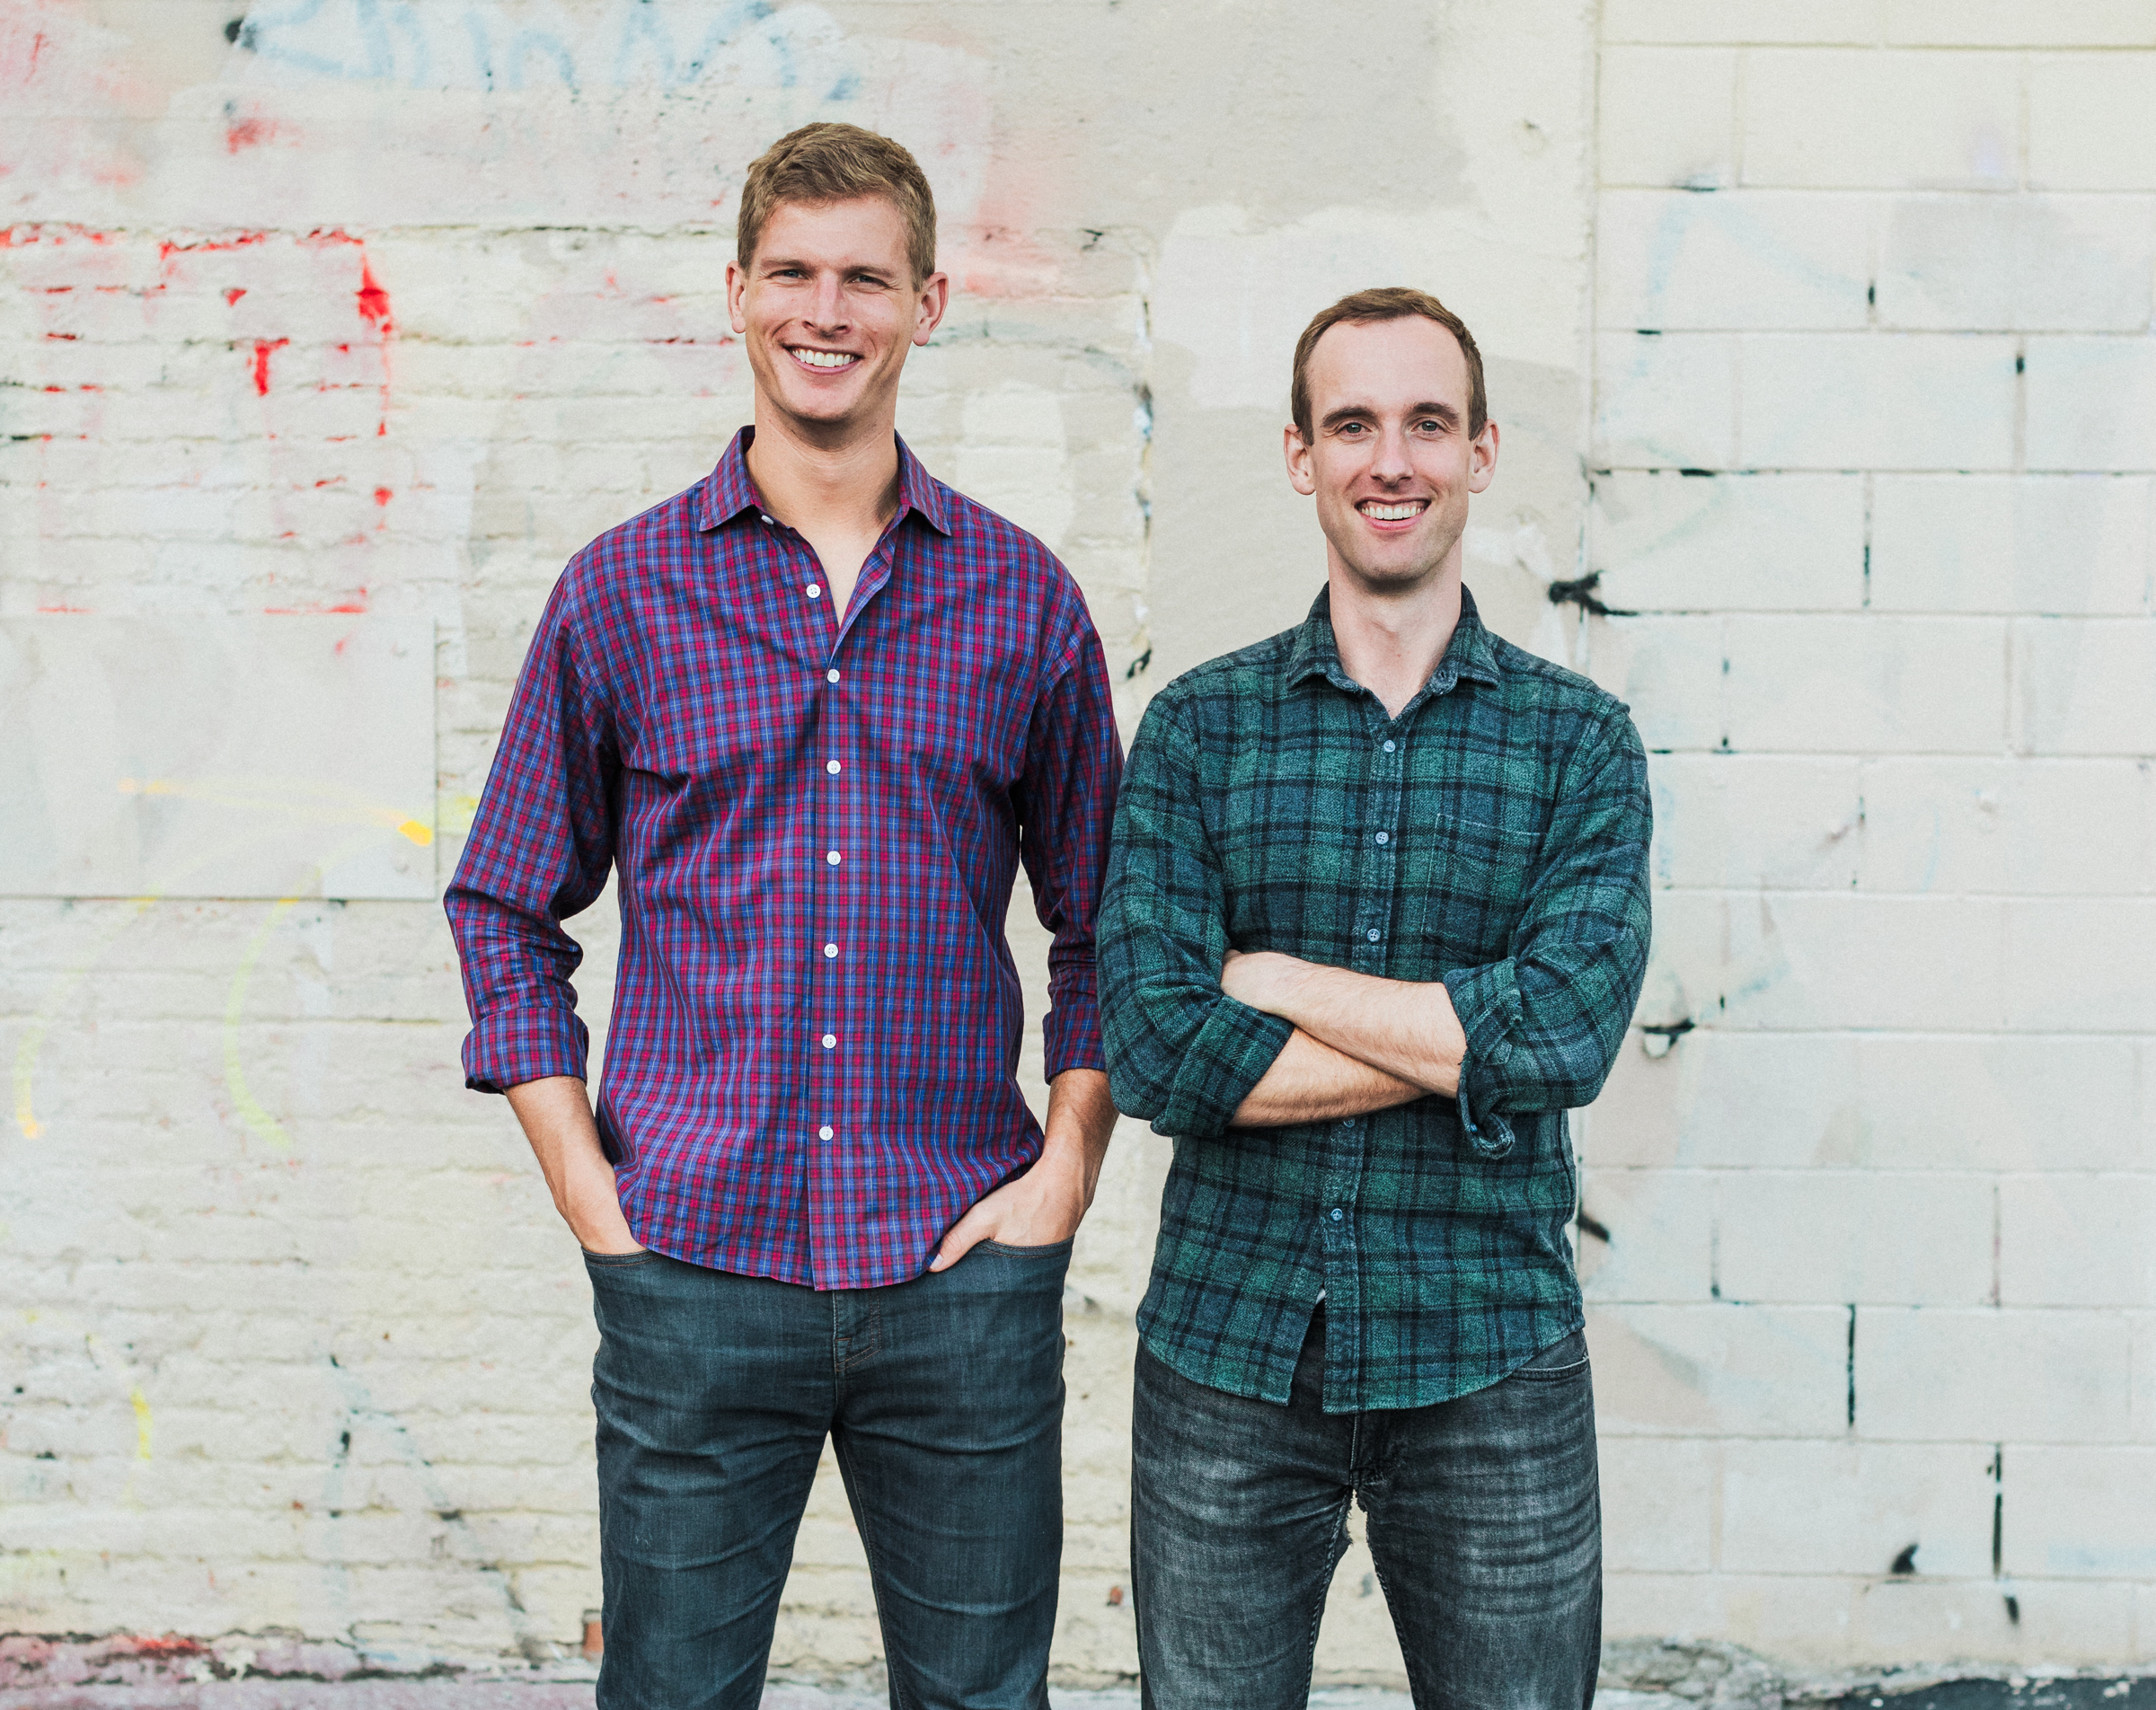 An image of Claim founders Sam Obletz and Tap Stephenson